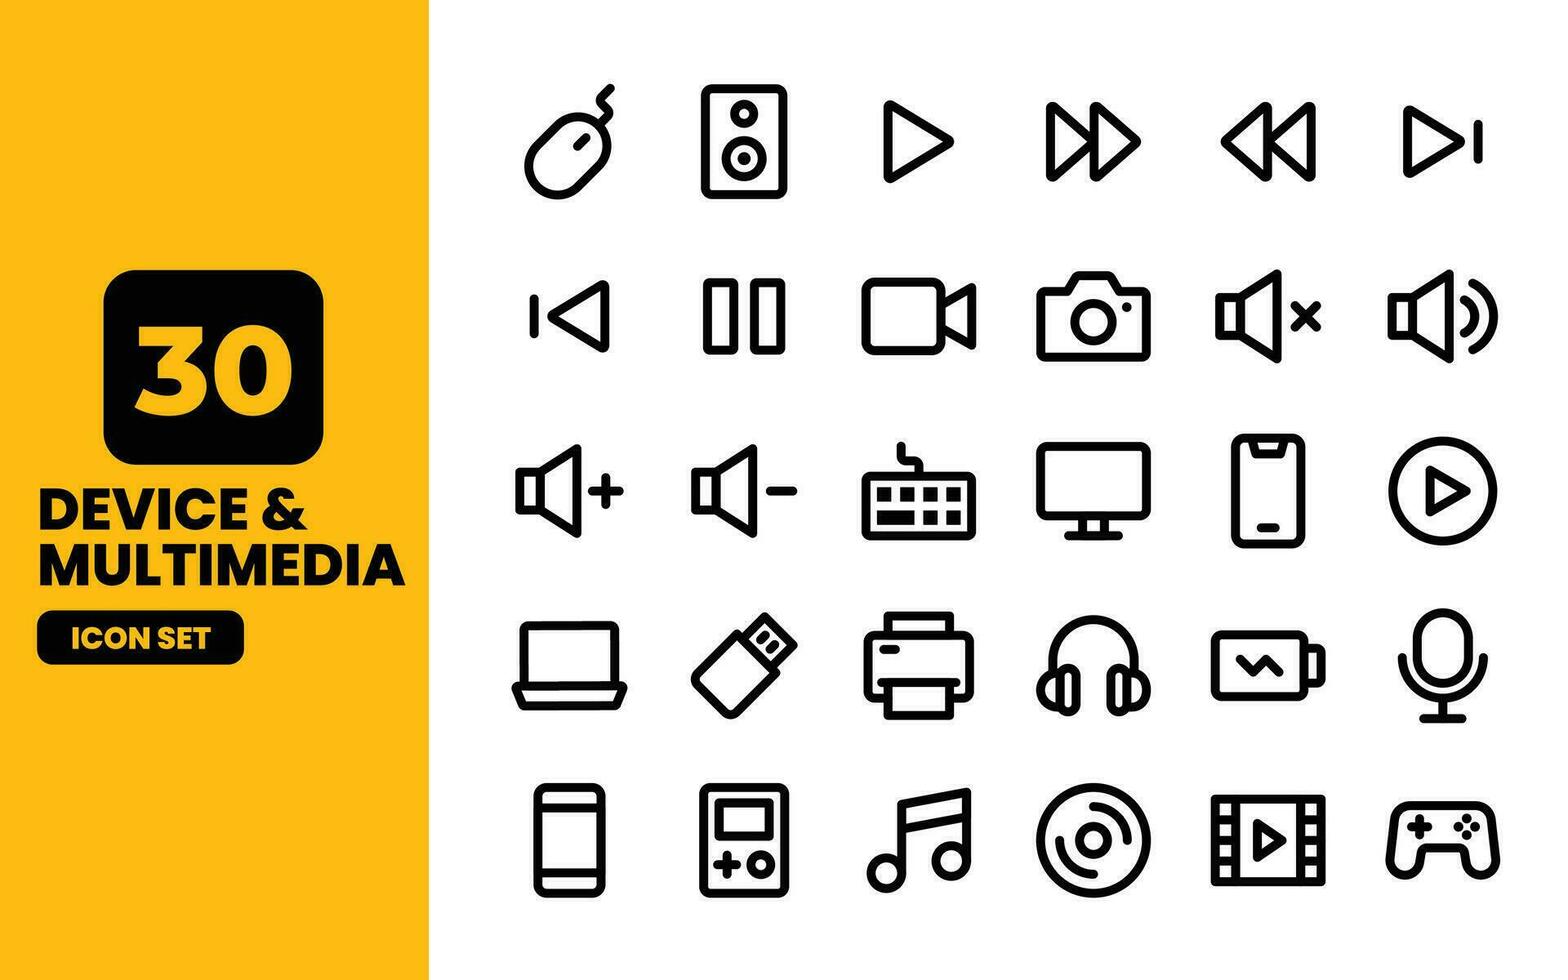 Multimedia and Device Icon set vector illustration